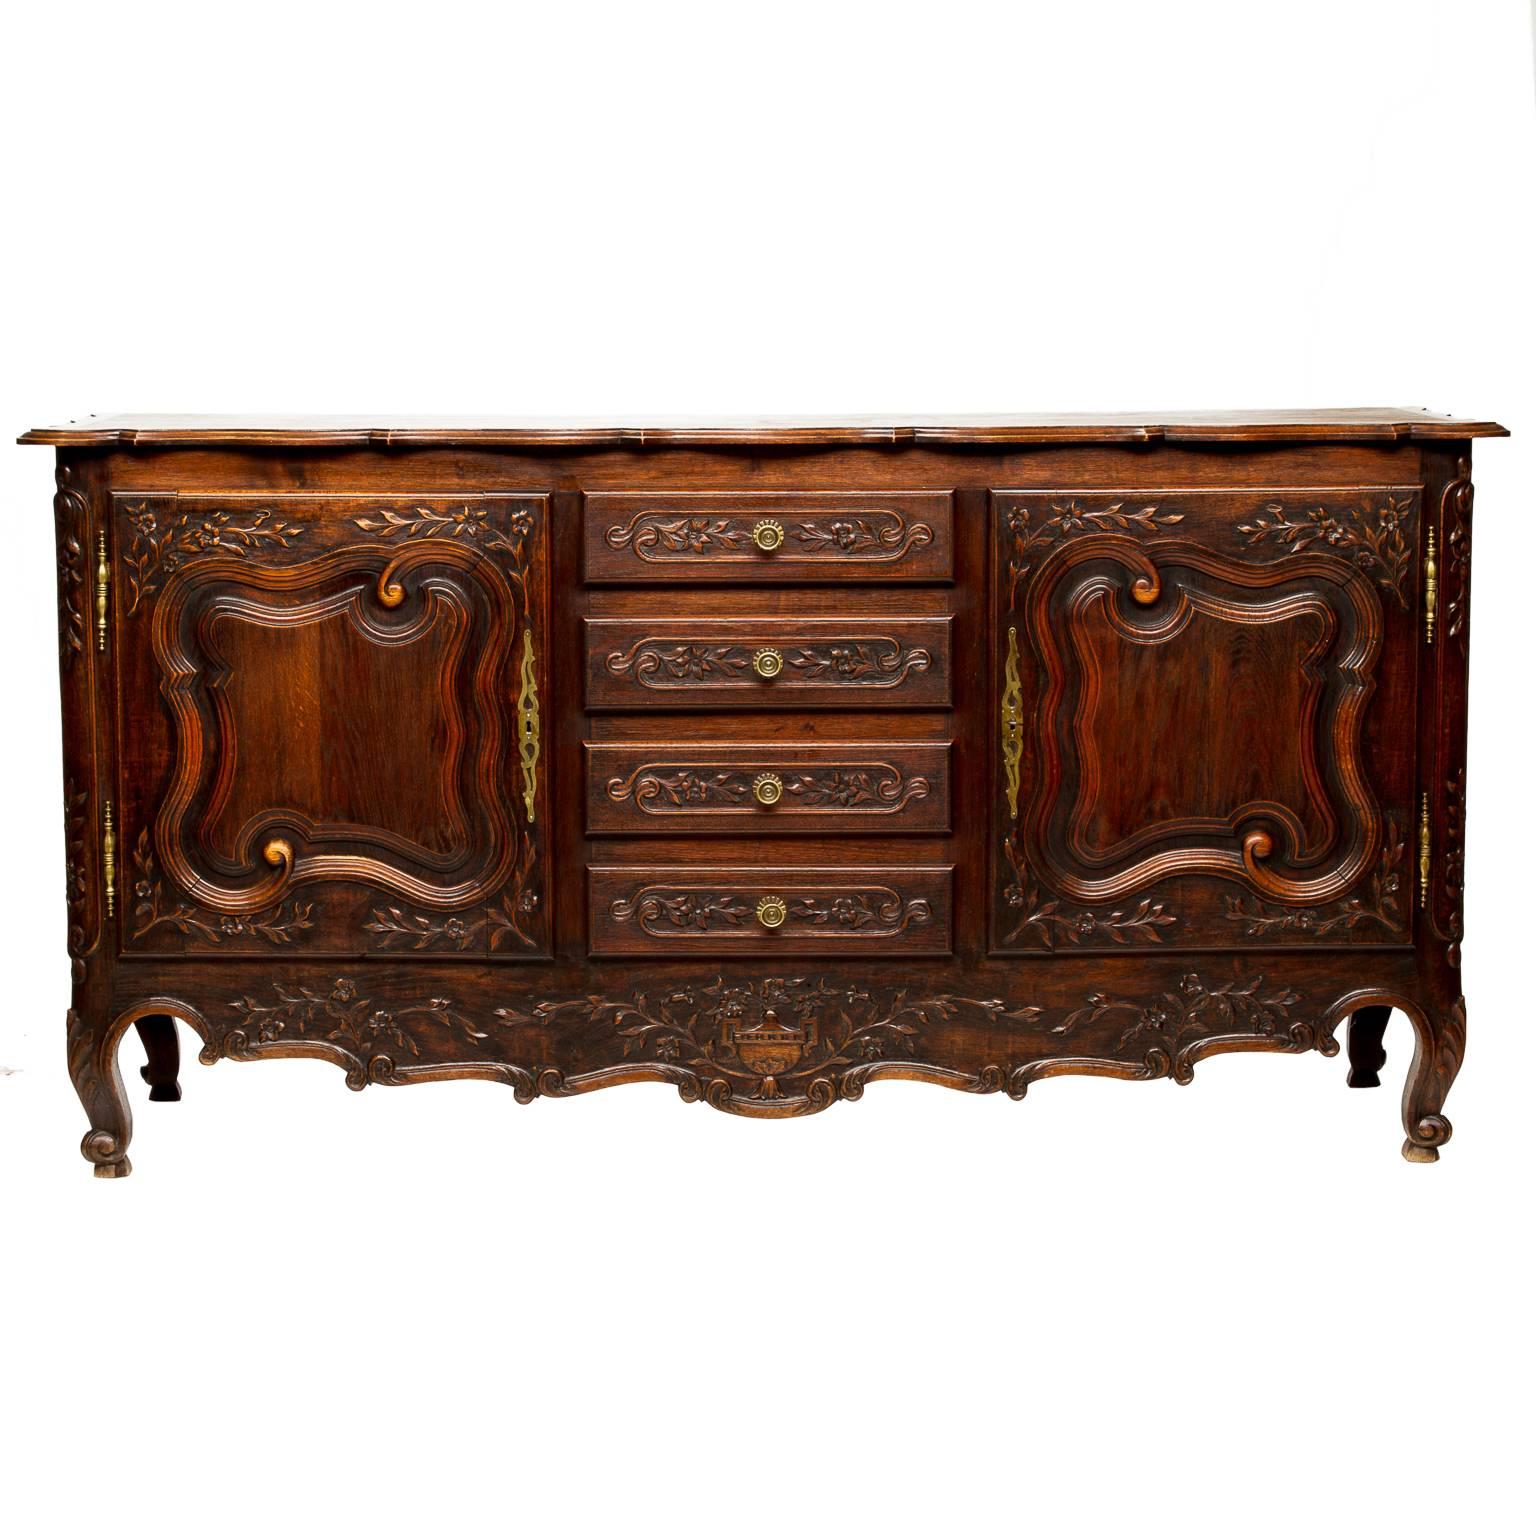 French Provincial Buffet from the 19th Century